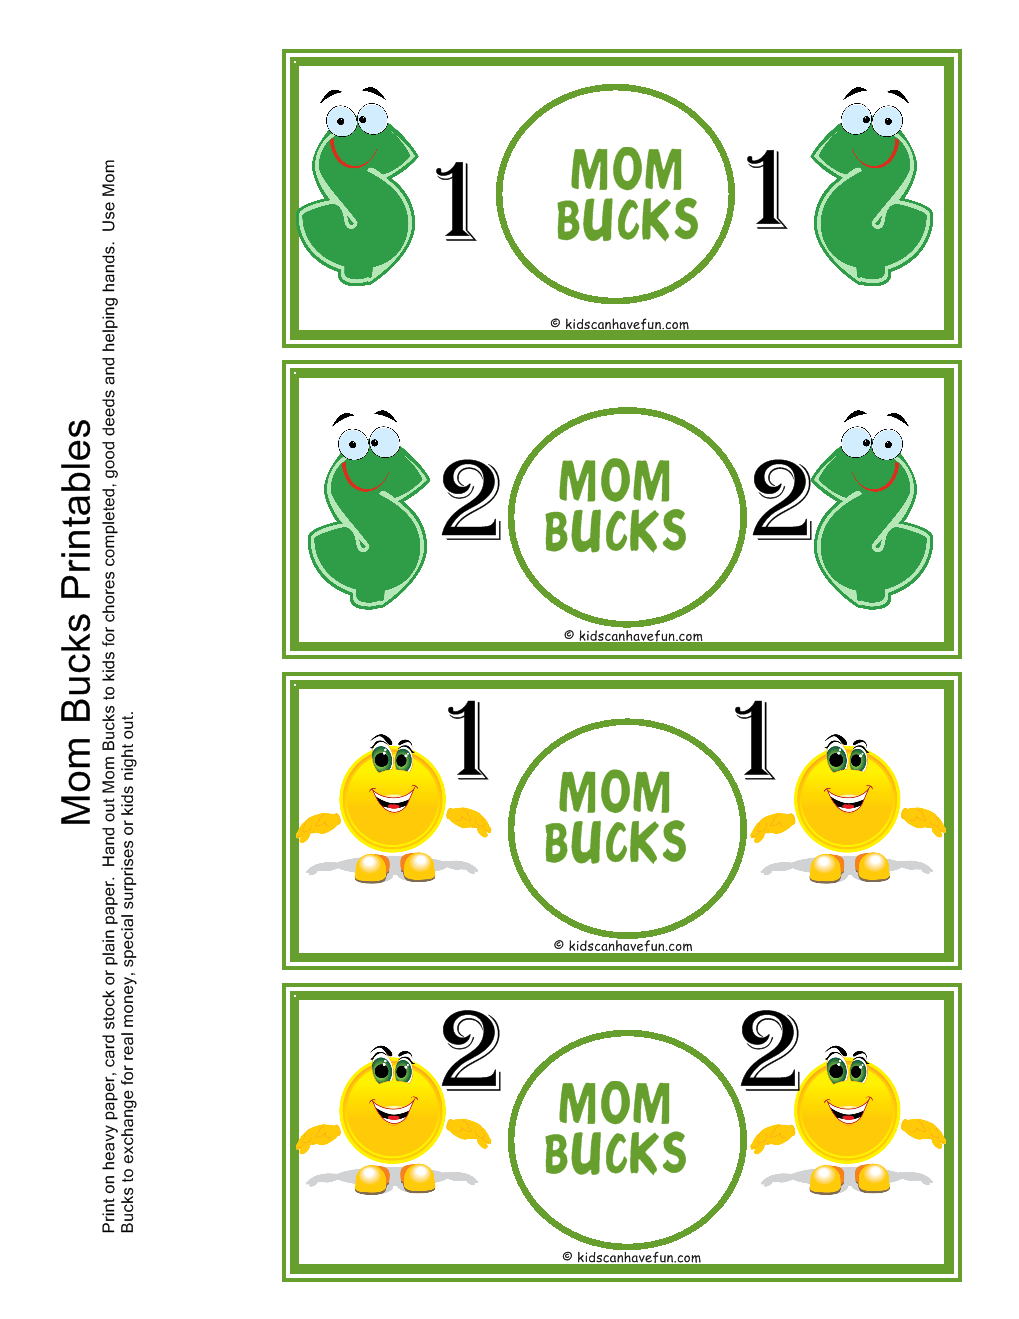 8 Best Images of Mom And Dad Printables Mom Bucks Printable, Father's